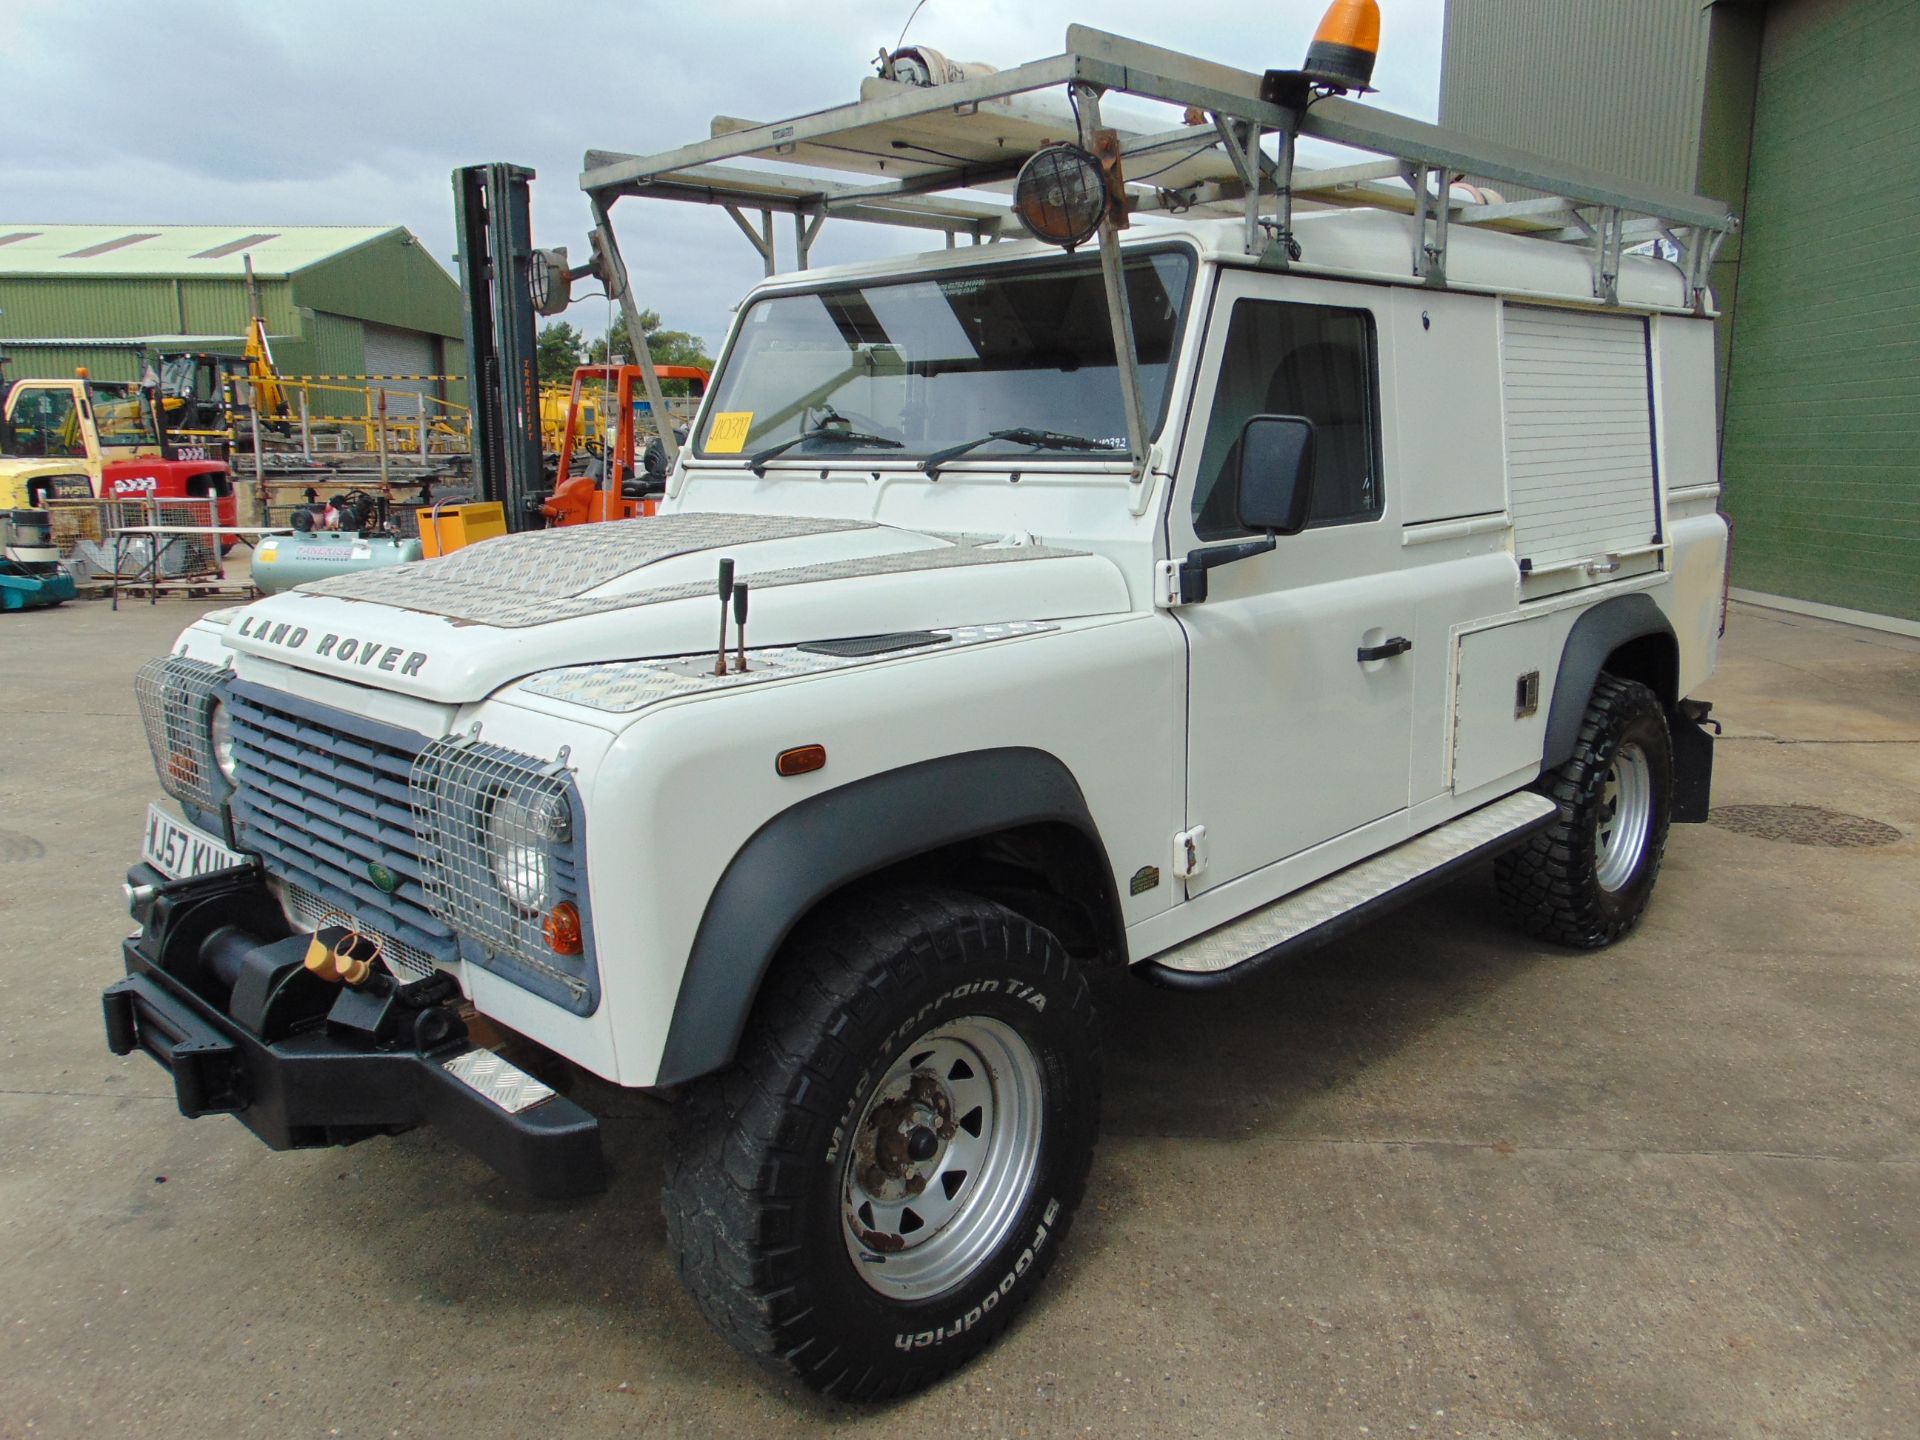 2007 Land Rover Defender 110 Puma hardtop 4x4 Utility vehicle (mobile workshop) with hydraulic winch - Image 4 of 31